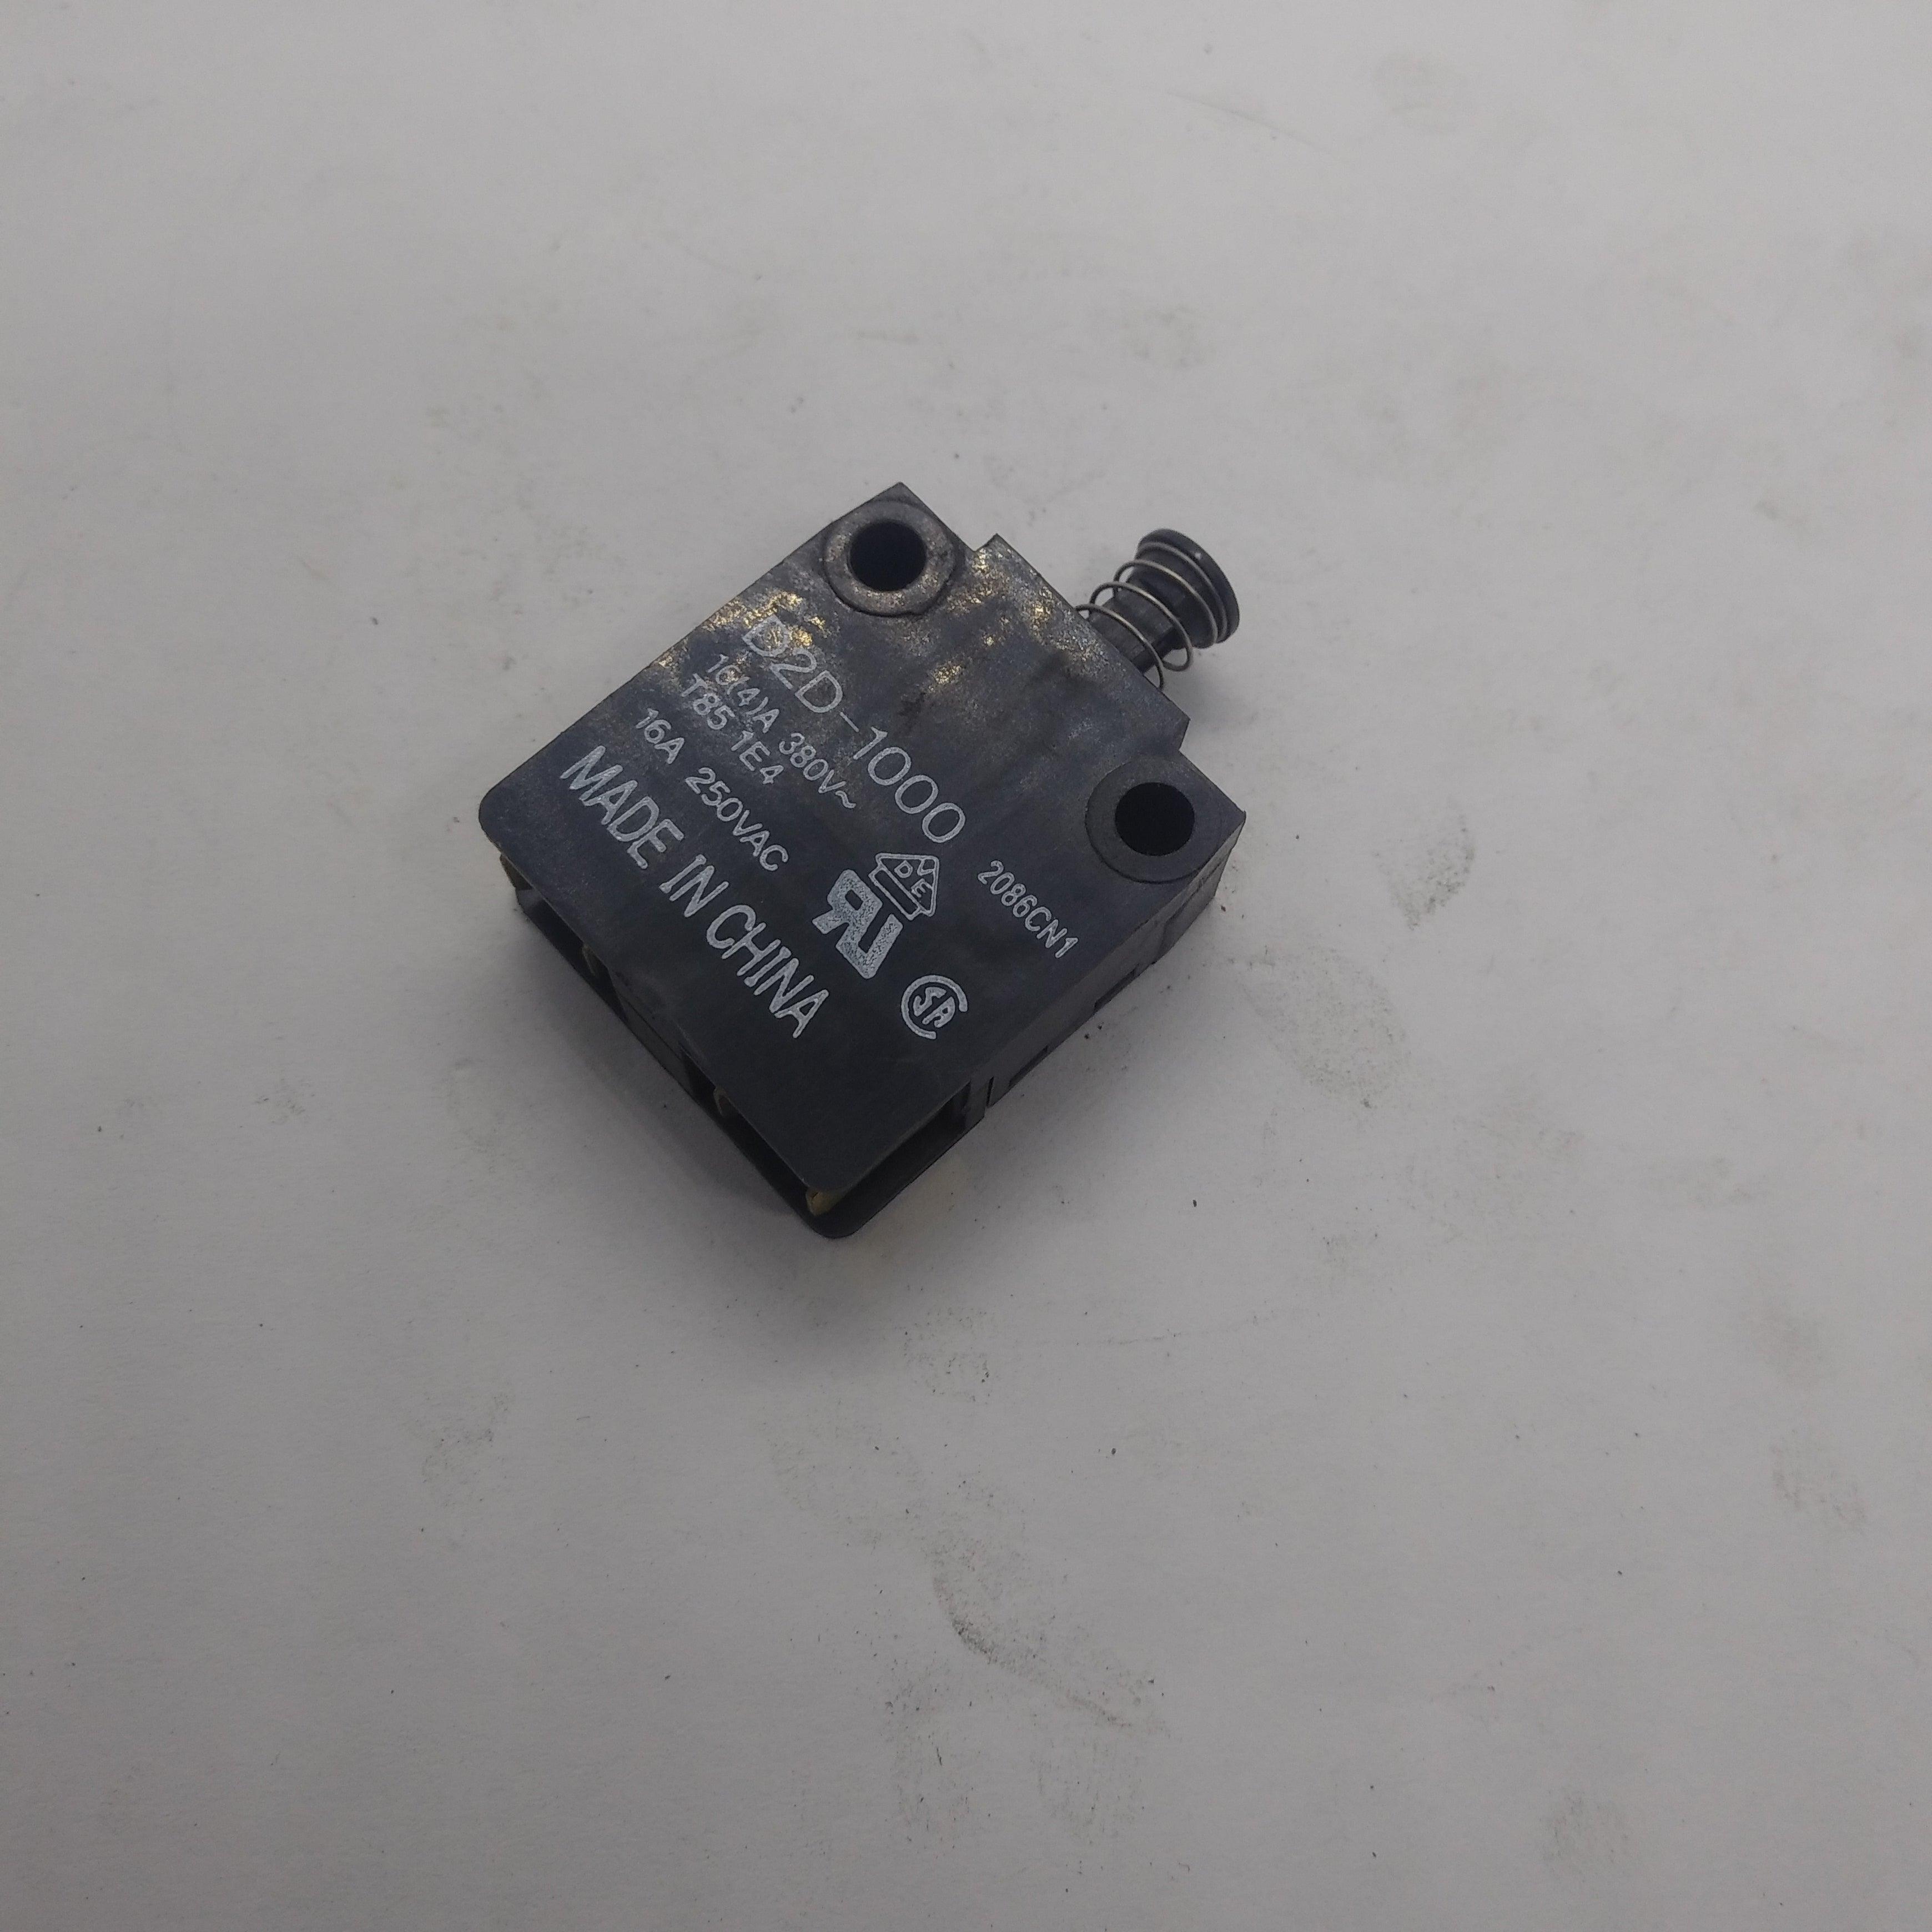 ROMA049  SECURUTY MICRO SWITCH D2D-1000<br>
FOR EXPERT - AMPTO